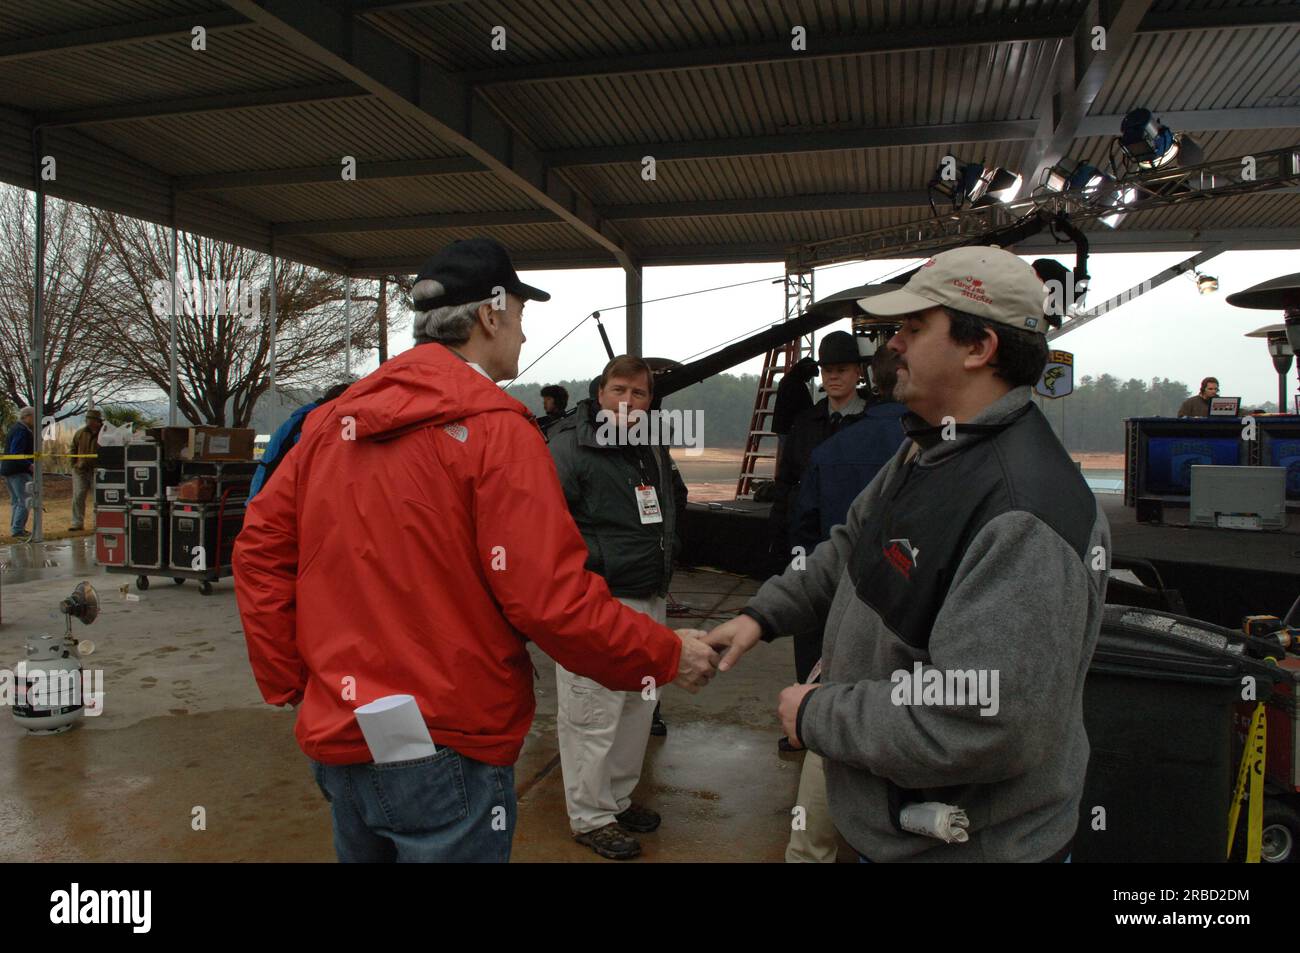 Segment of ESPN Radio's Mike and Mike Show, co-hosted by Mike Greenberg and Mike Golic, at the Bassmasters Classic professional fishing tournament, Greenville, South Carolina, with guest appearance by Secretary Dirk Kempthorne Stock Photo